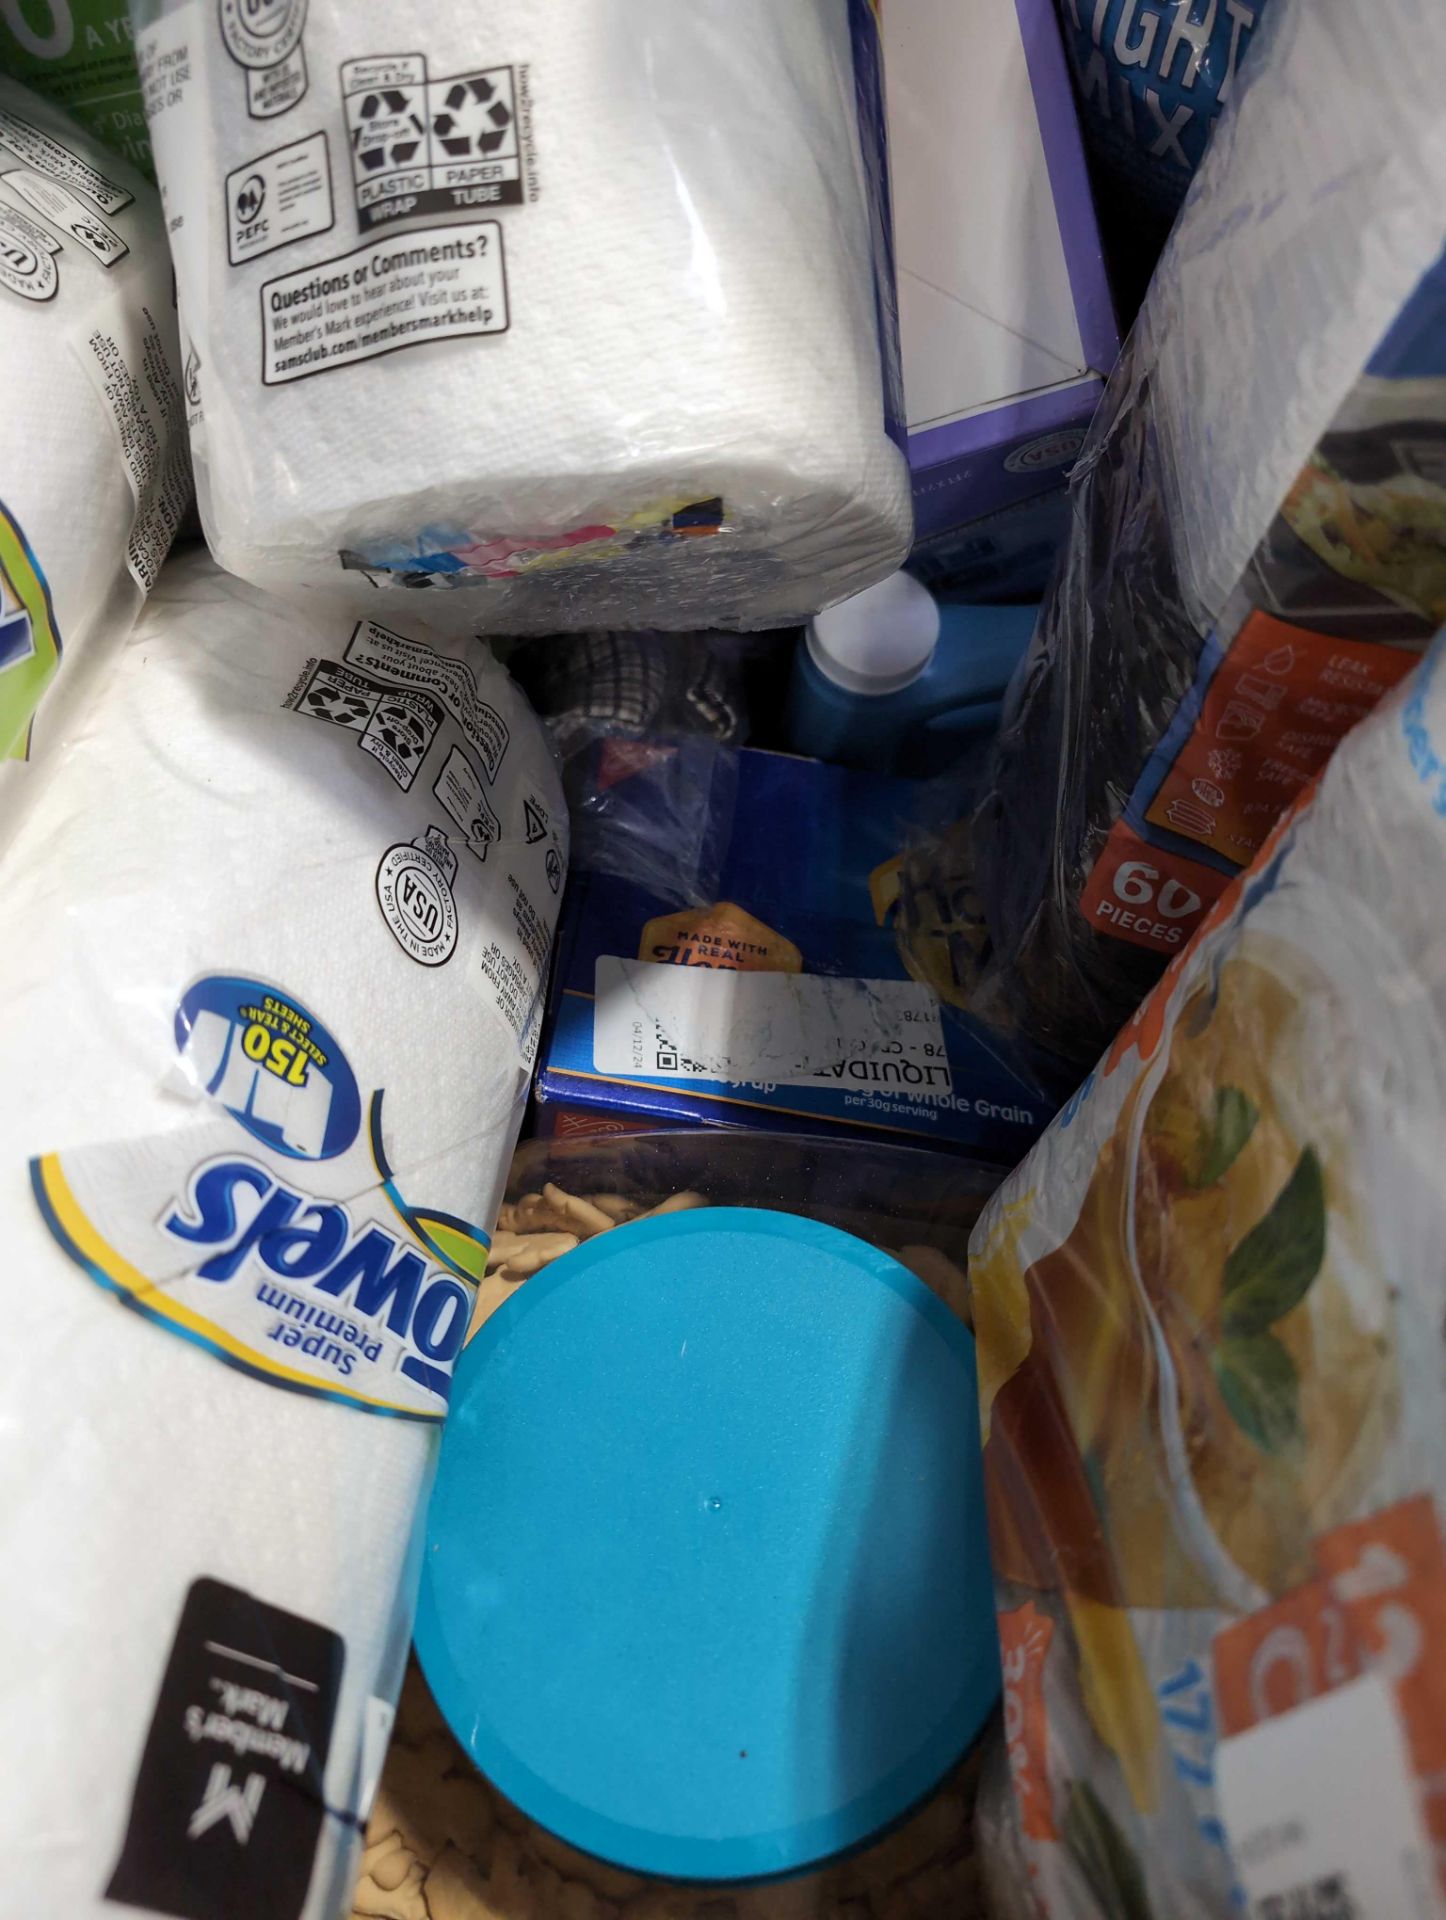 Big box store in a box: Toilet Paper, food containers, Towels, laundry detergent, nacho cheese sauce - Image 10 of 12